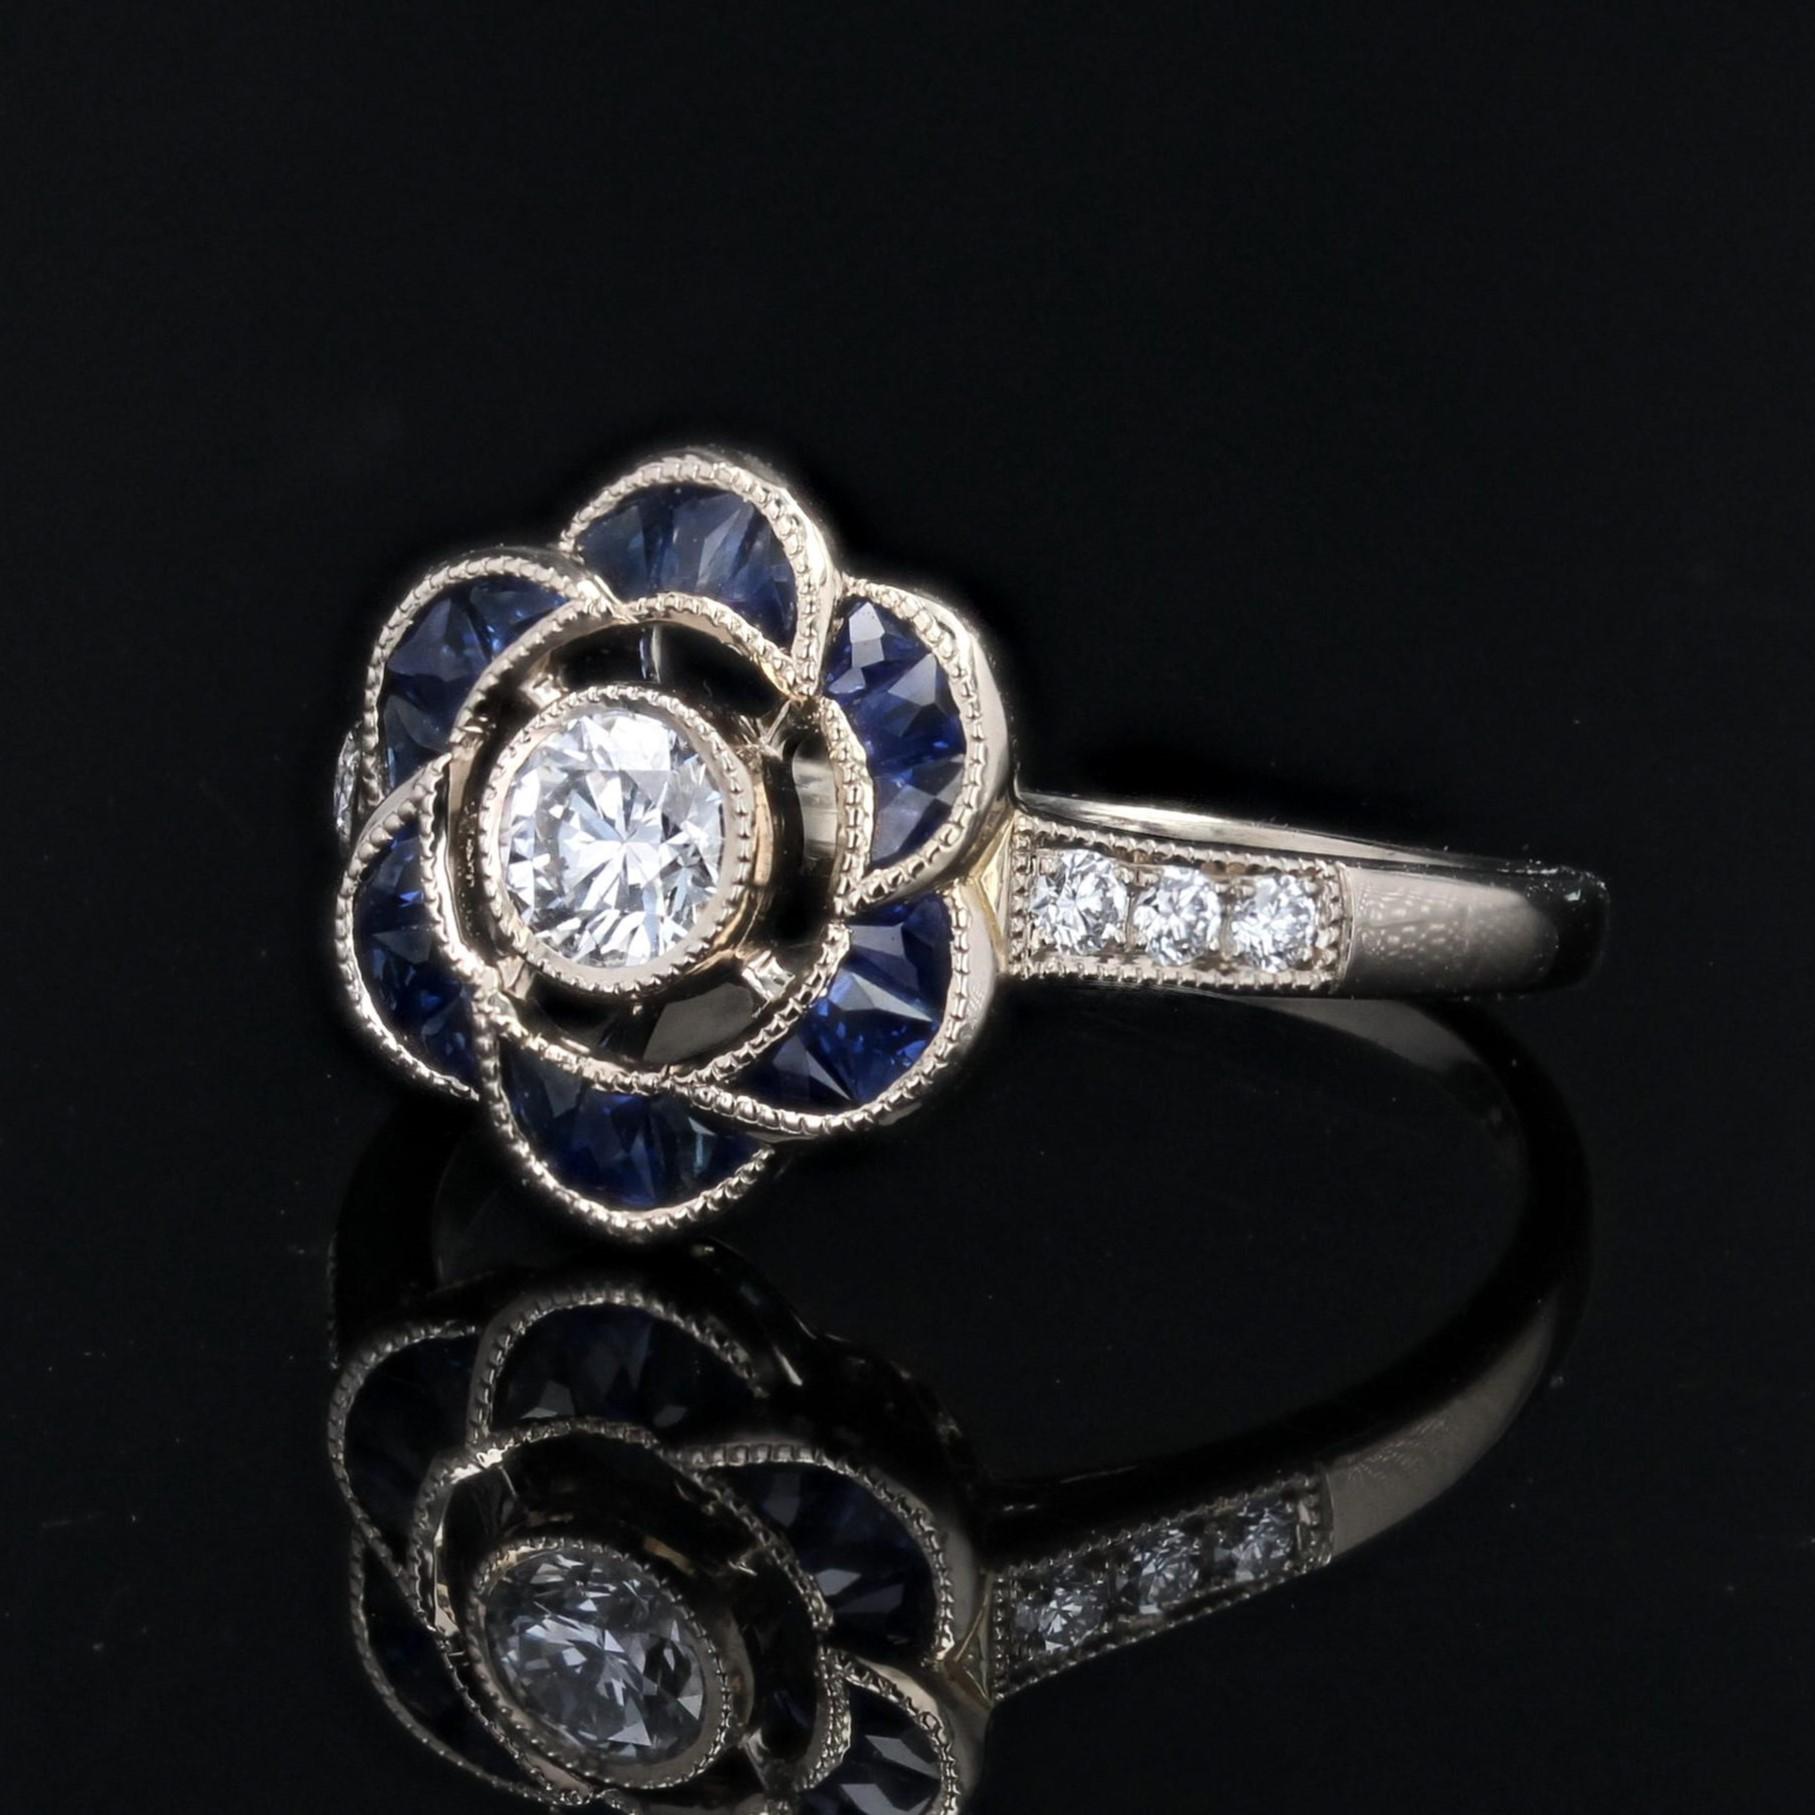 New Art Deco Style Calibrated Sapphires Diamonds 18 K White Gold Flower Ring For Sale 2